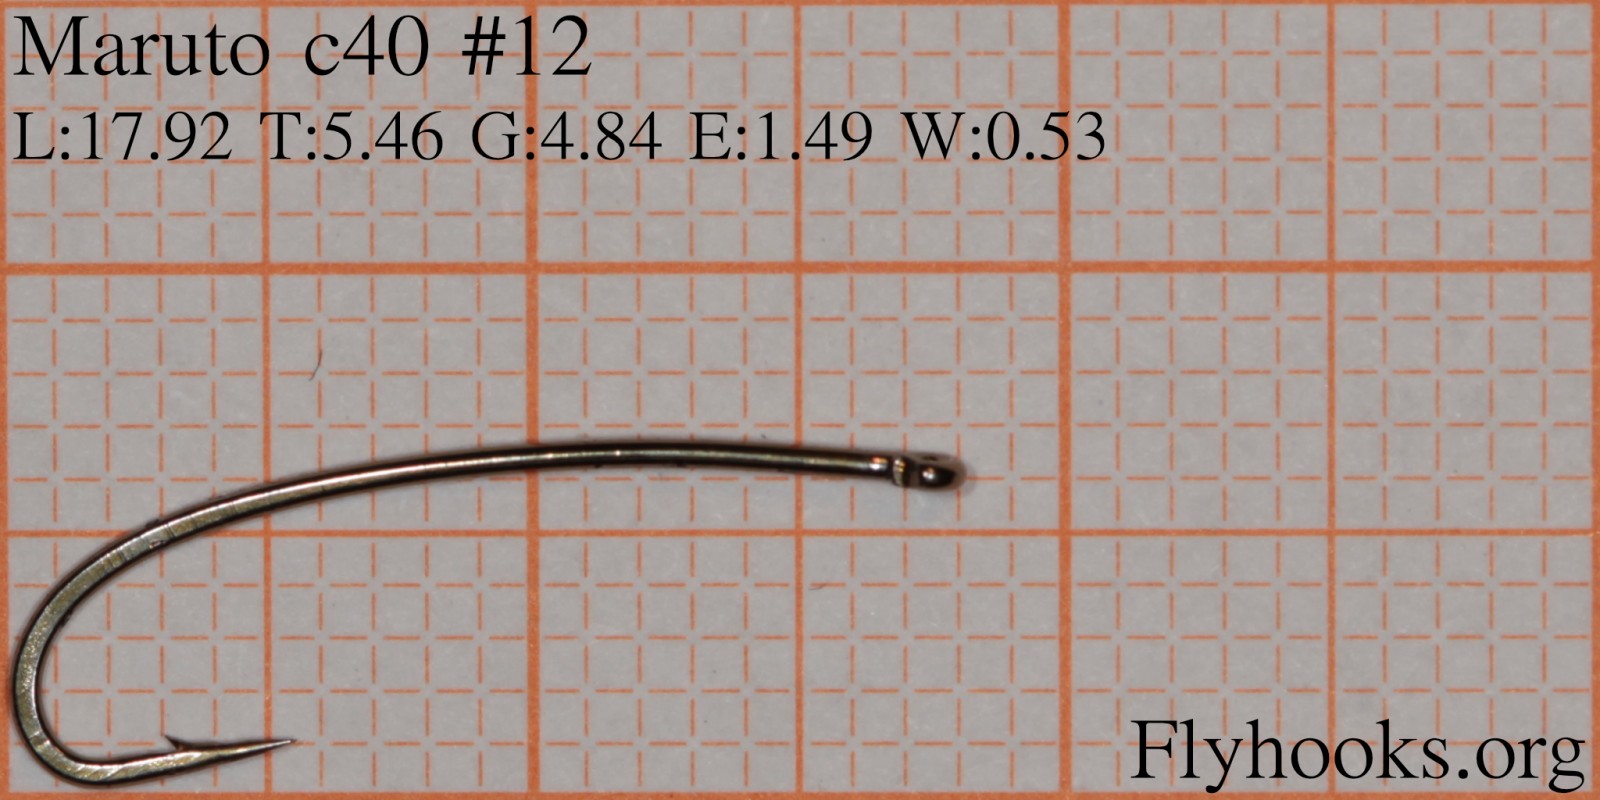 Maruto c40 Fly Hooks Curves Long Shank for nymphs or similar in 9 Sizes